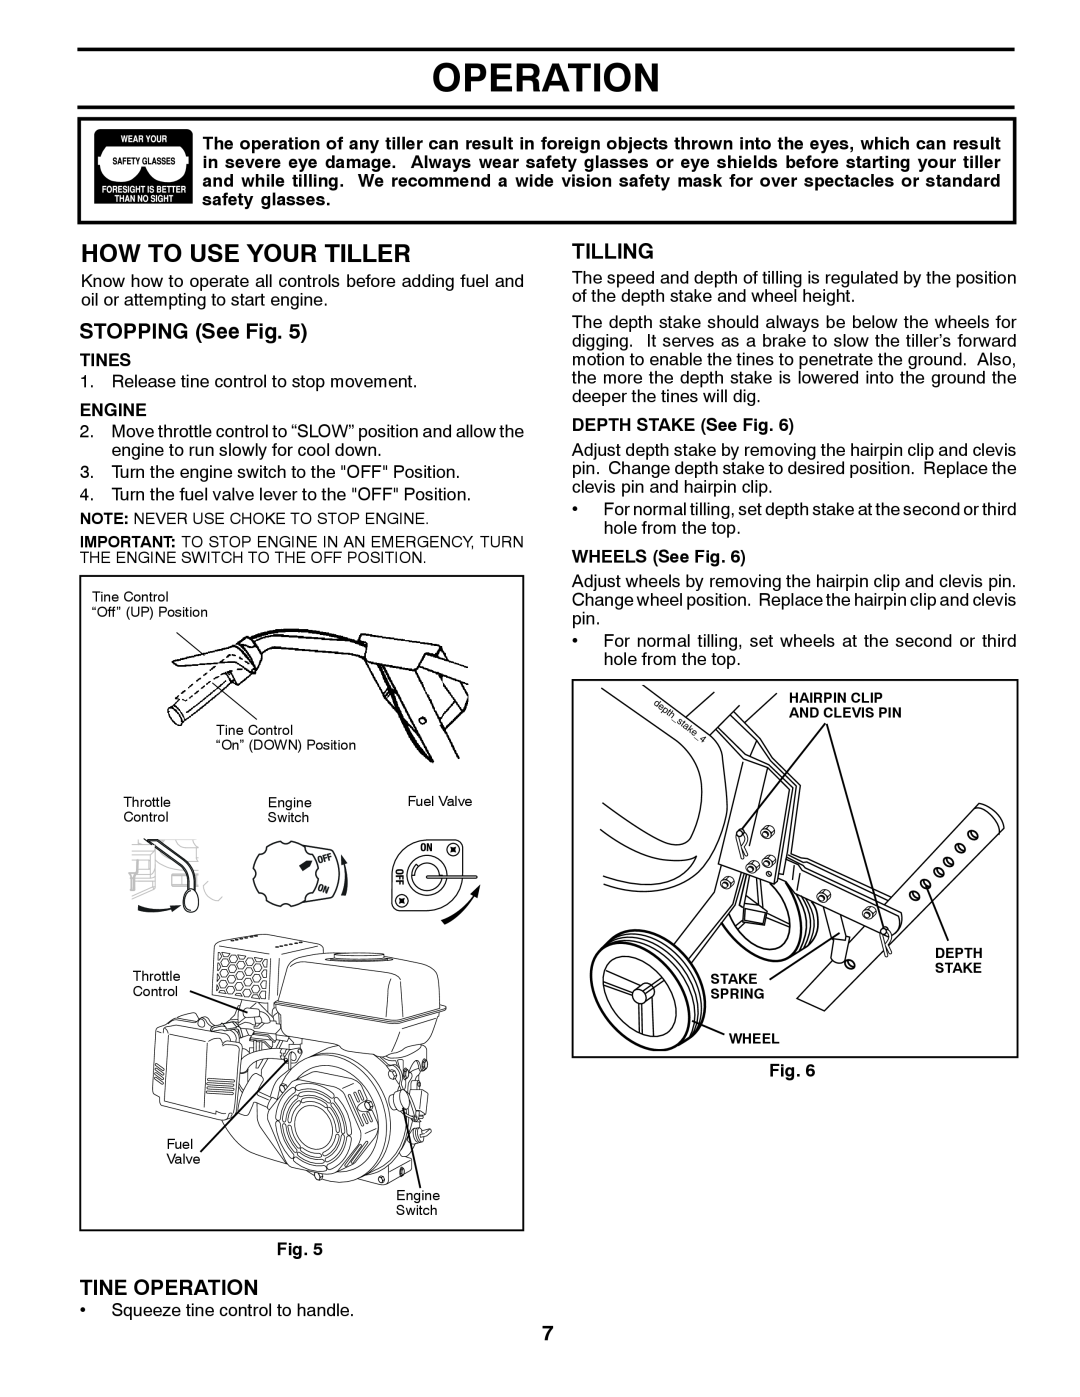 Poulan 96082001300 How To Use Your Tiller, STOPPING See Fig, Tilling, Tines, Engine, DEPTH STAKE See Fig, WHEELS See Fig 